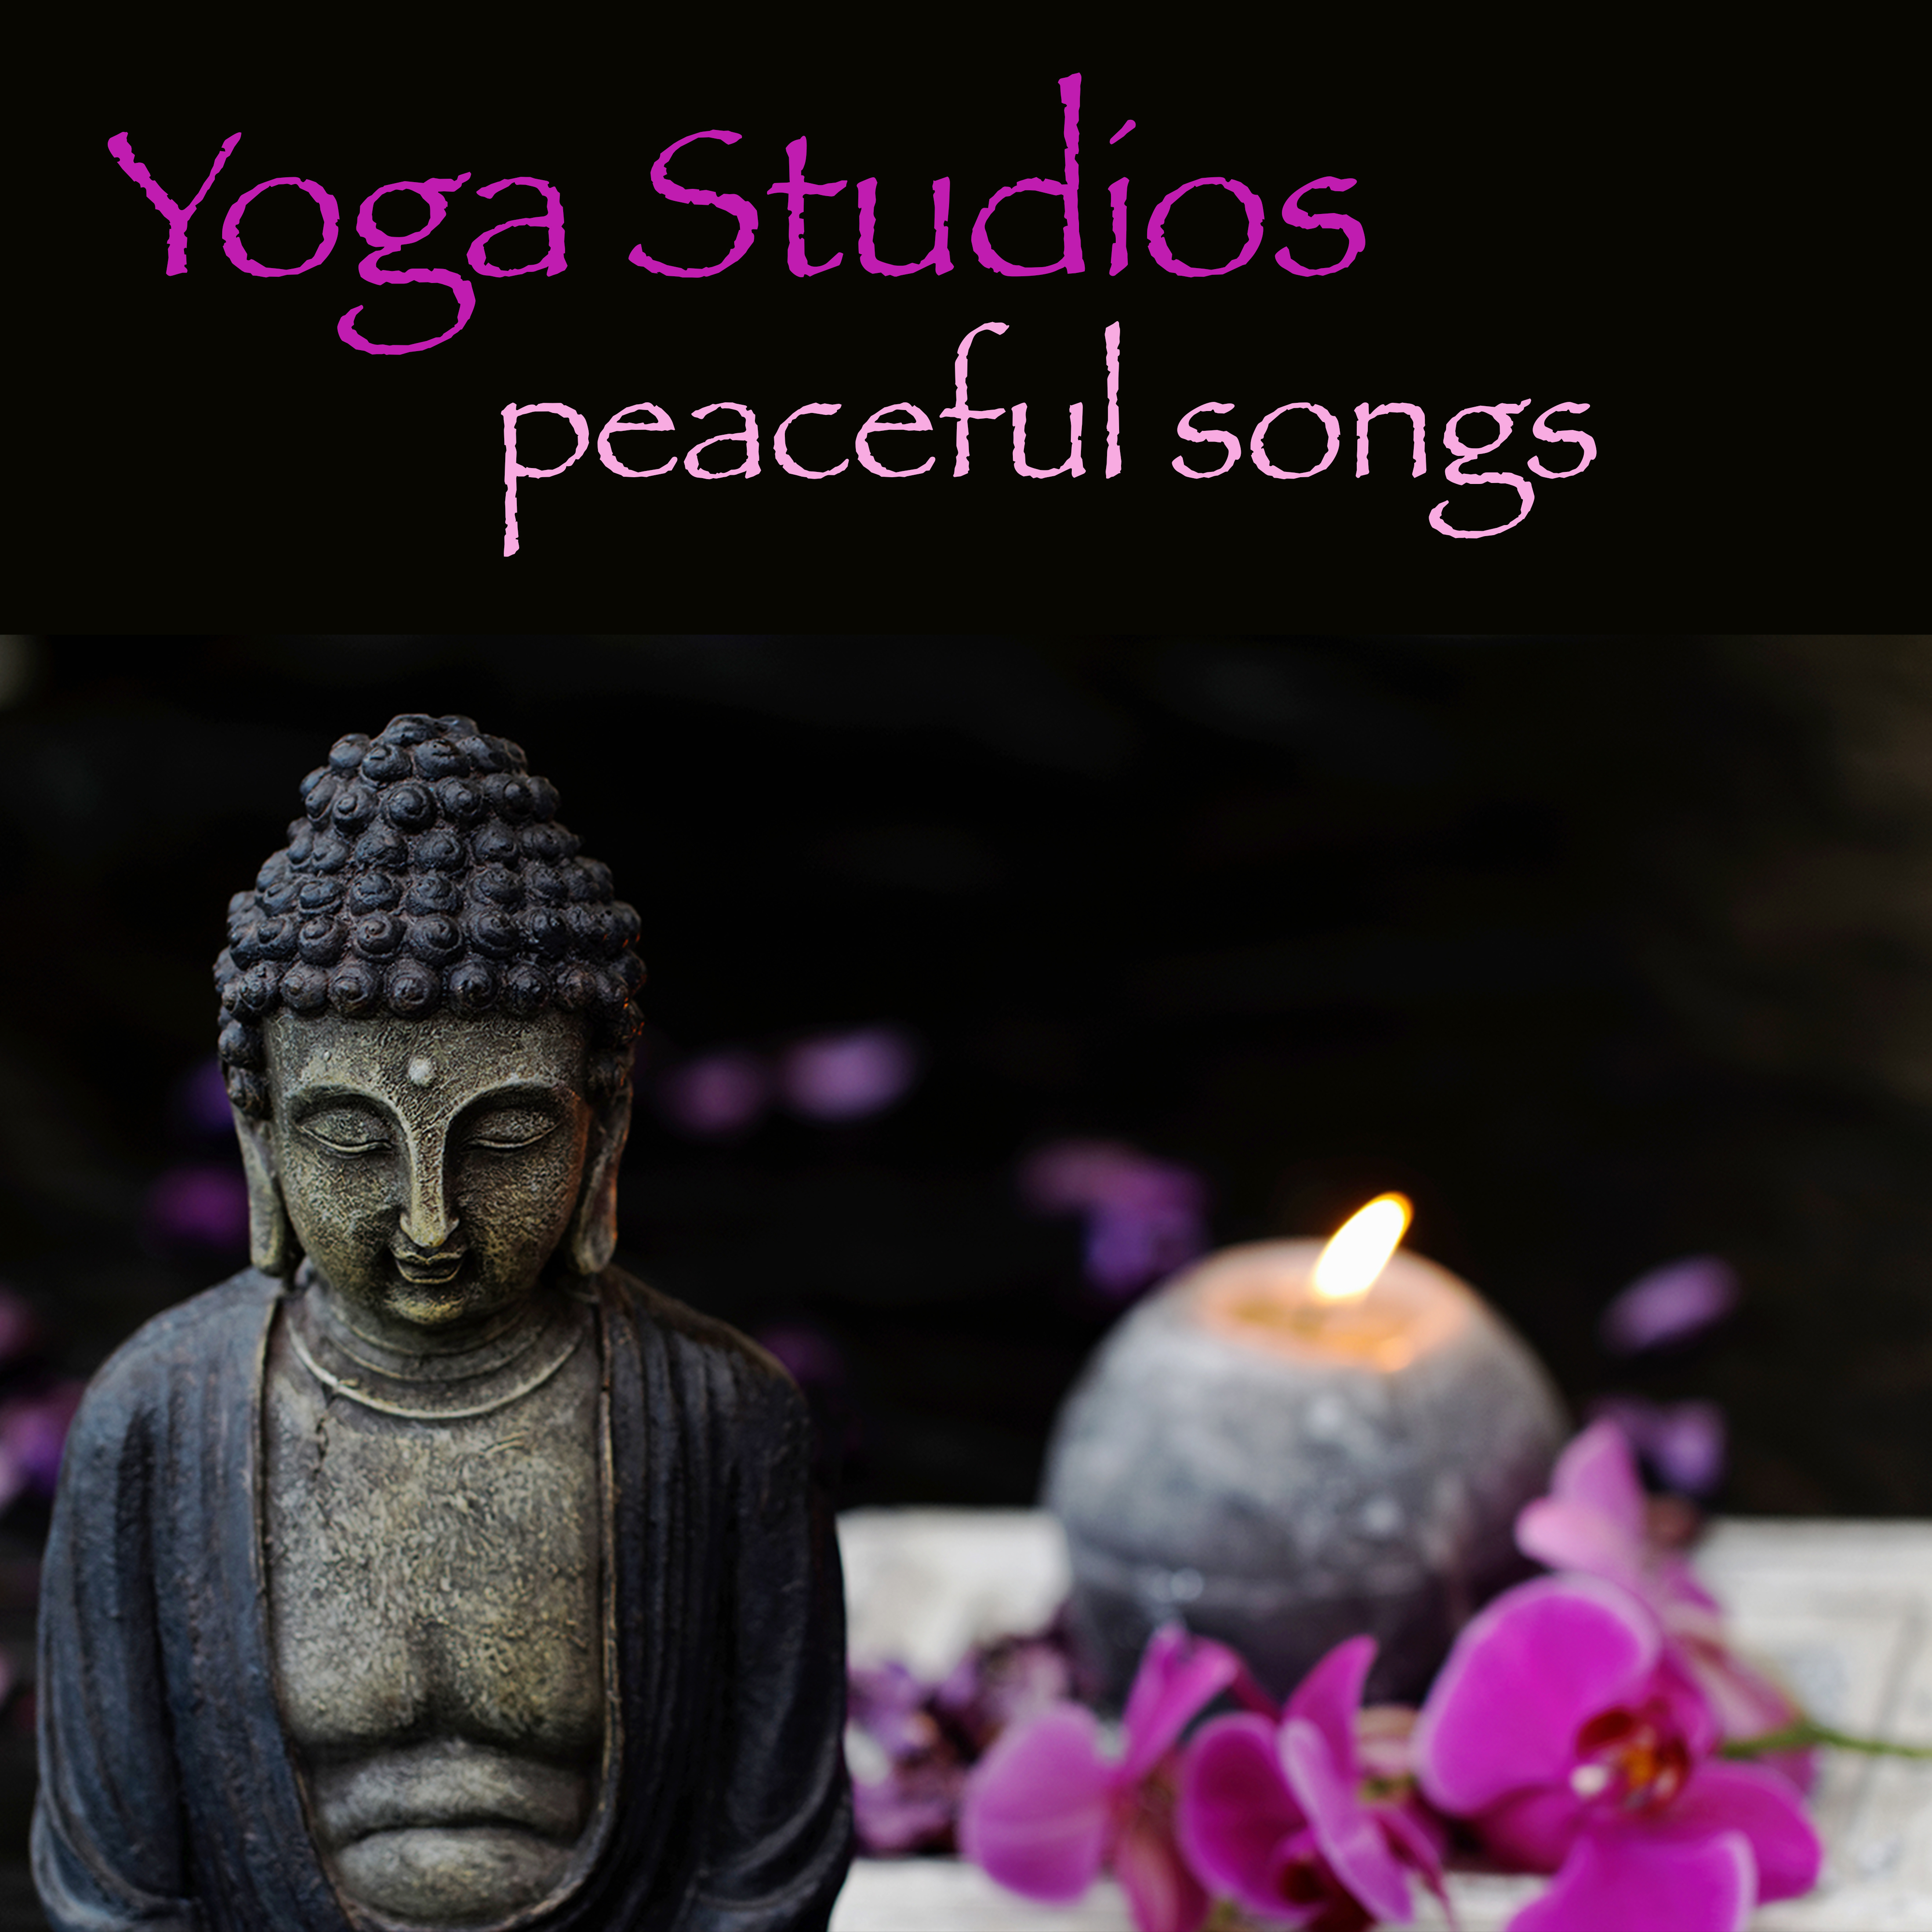 Amazing Songs for Morning Yoga